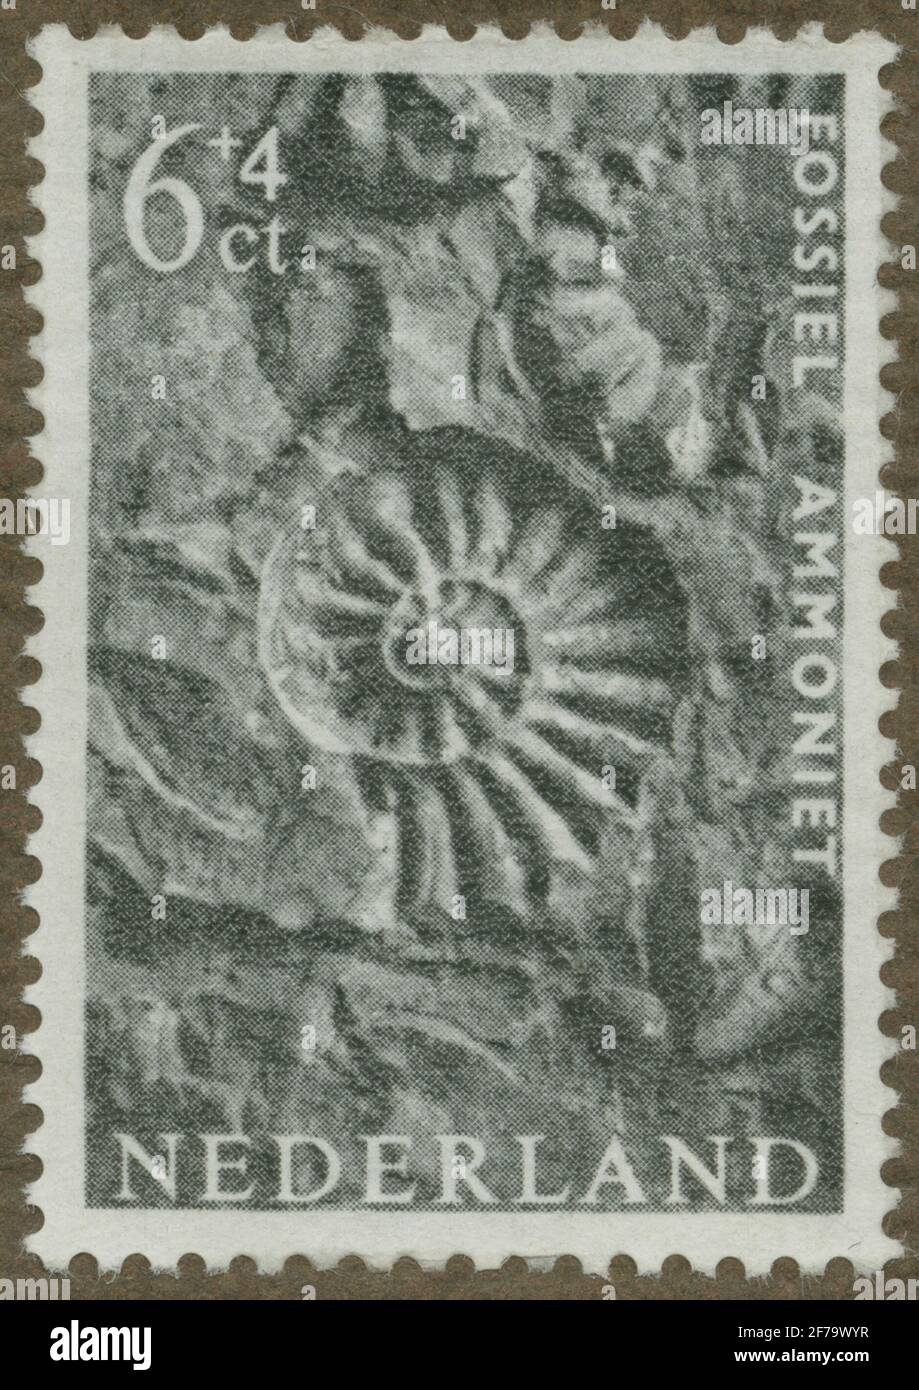 Stamp of Gösta Bodman's Philatelist Association, started in 1950.The stamp from the Netherlands, 1962. Motifs of fossil imprints of seashell. 'About 140-175 million years old. S.K. Ammonite Spinatus'. 'From the Zoological Museum, Amsterdam. Museum Seir'. Stock Photo